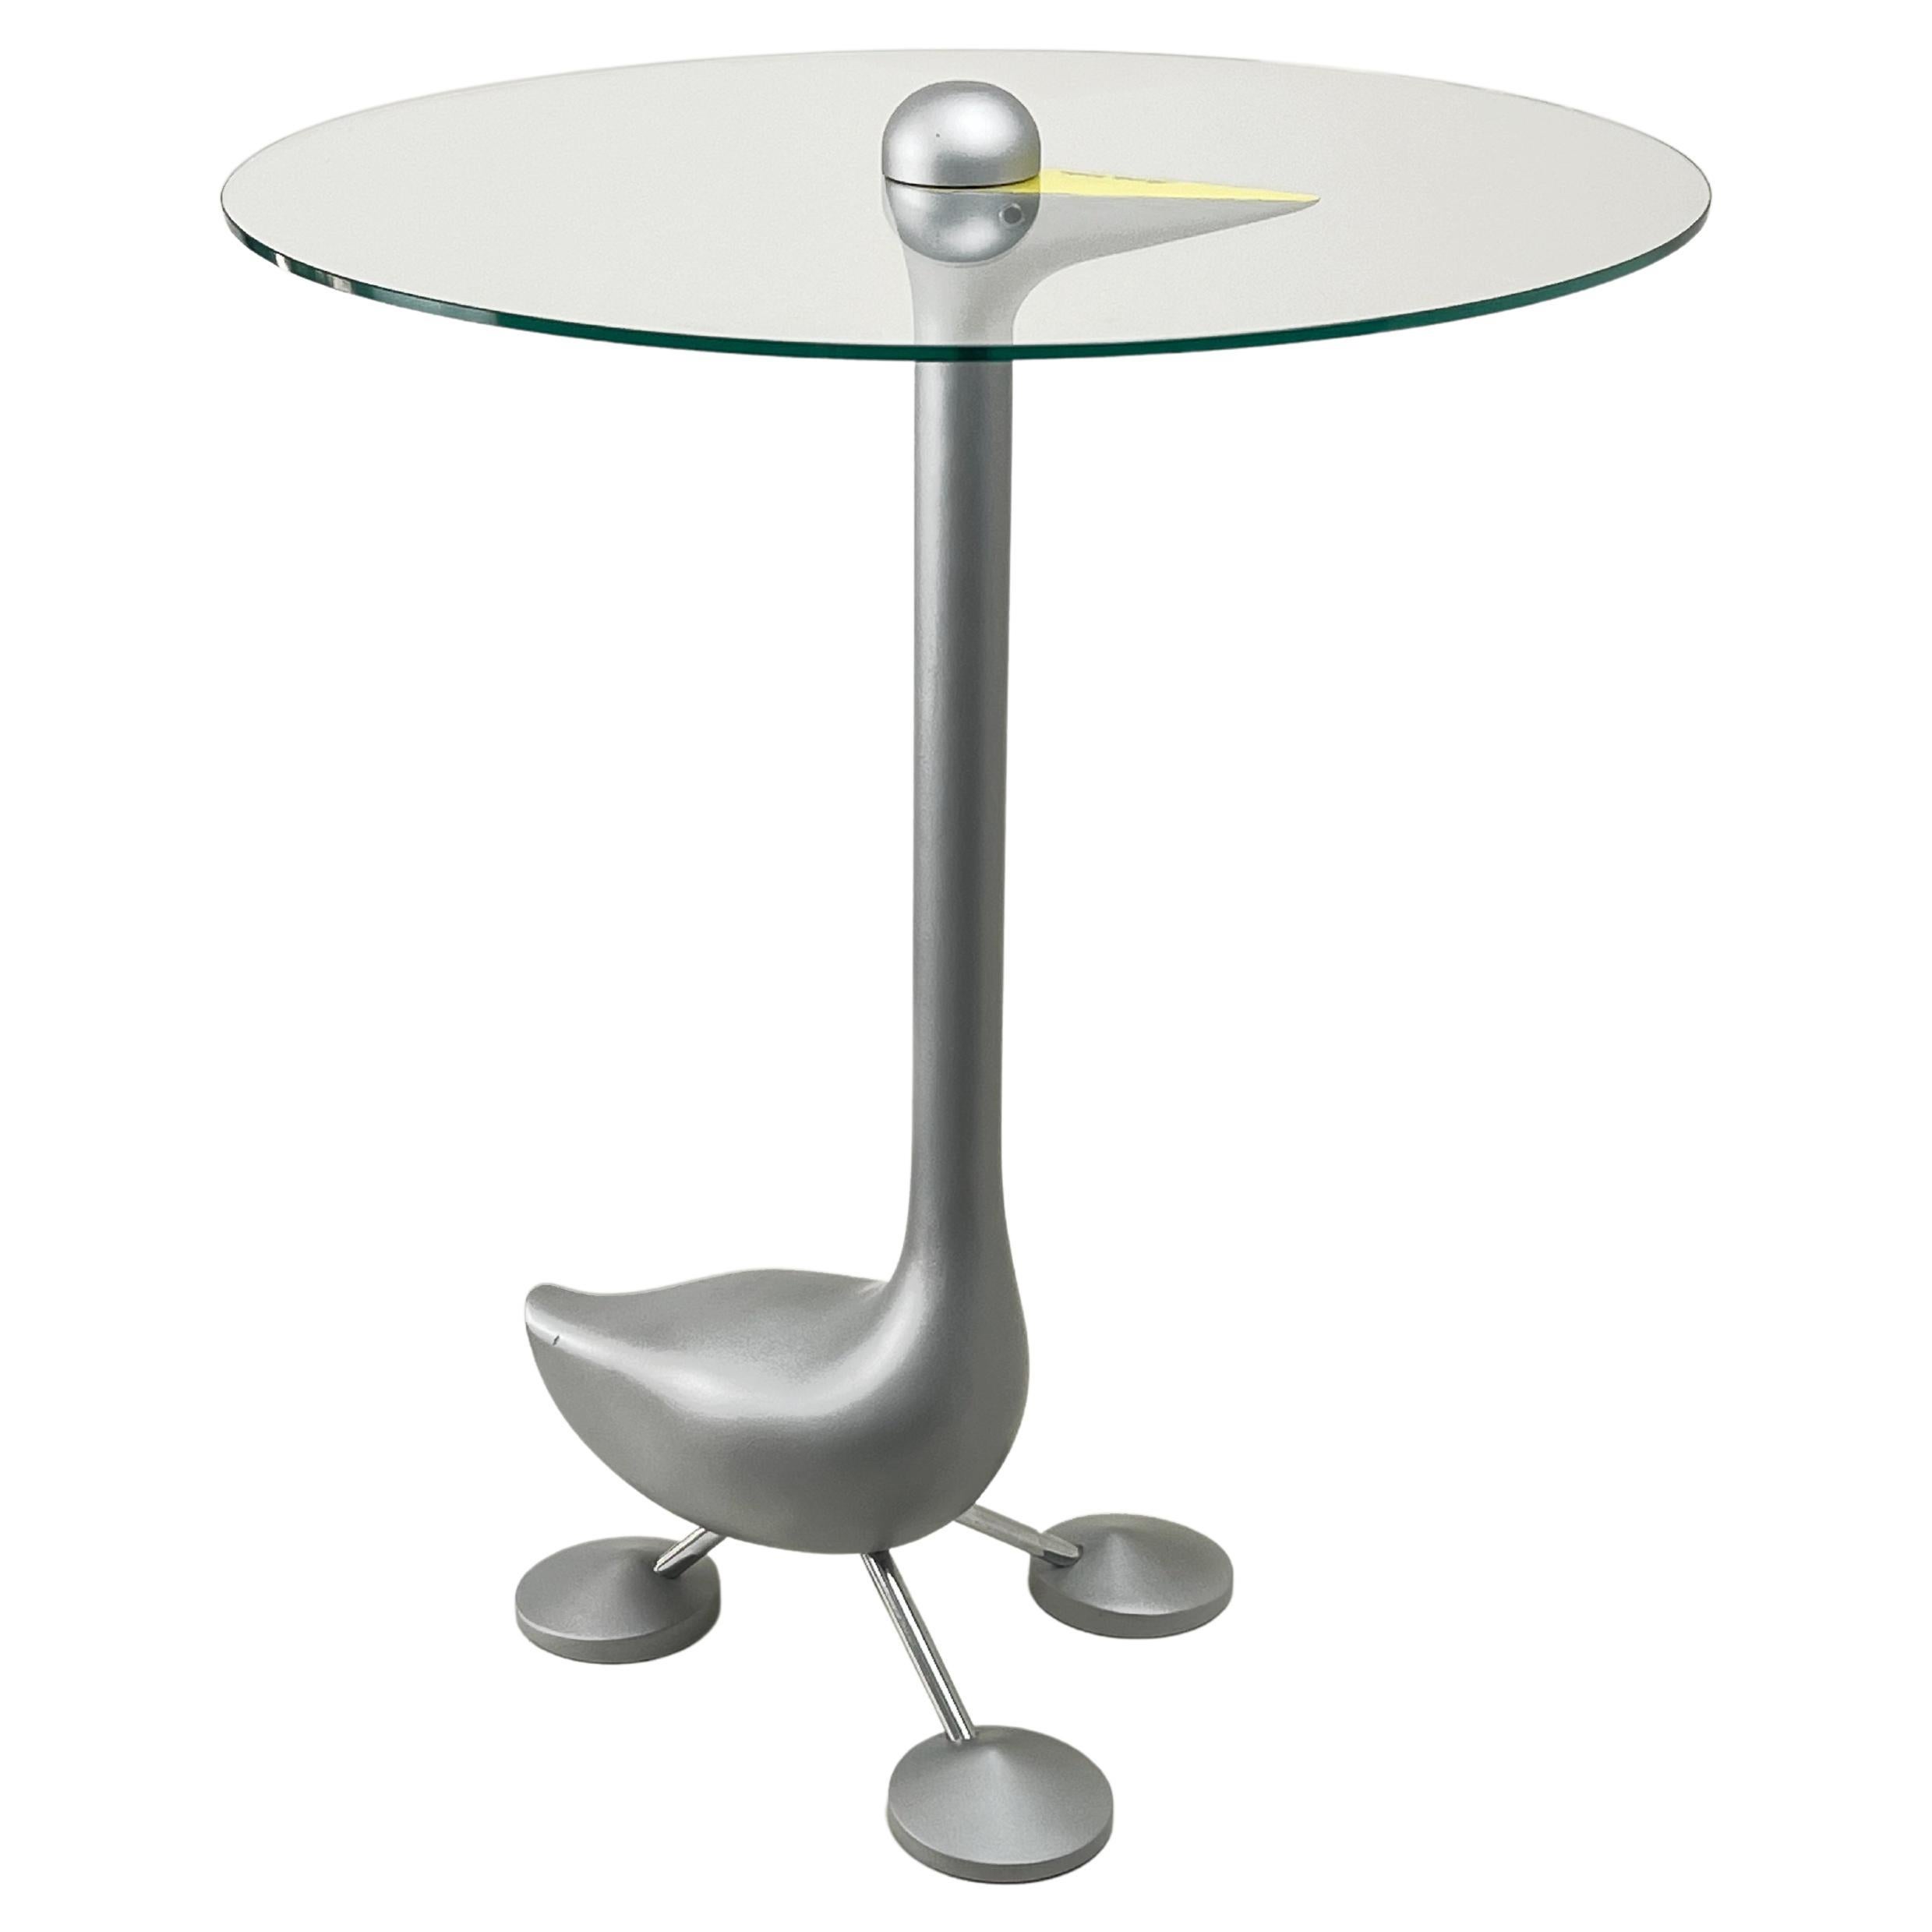 Table d'appoint italienne postmoderne Sirfo, Alessandro Mendini pour Zanotta, années 1980